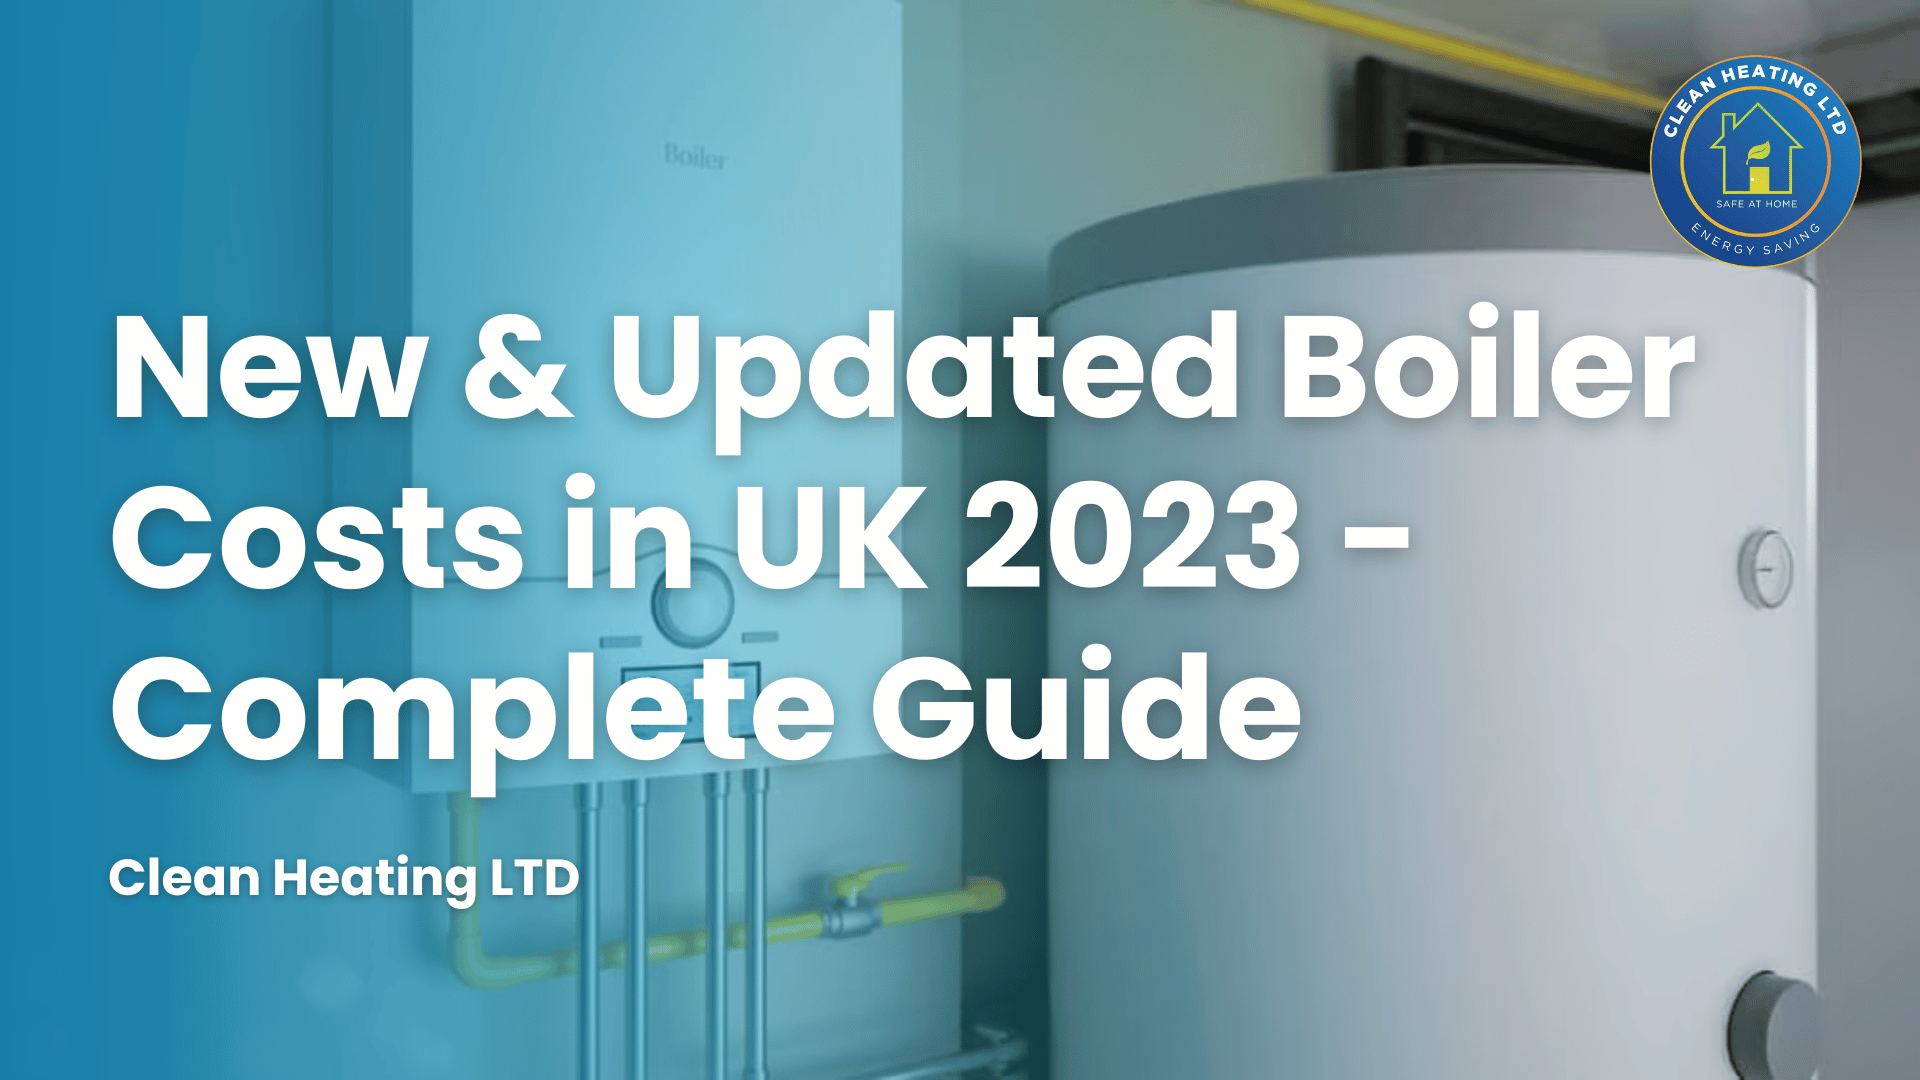 New & Updated Boiler Costs in UK 2023 - Complete Guide